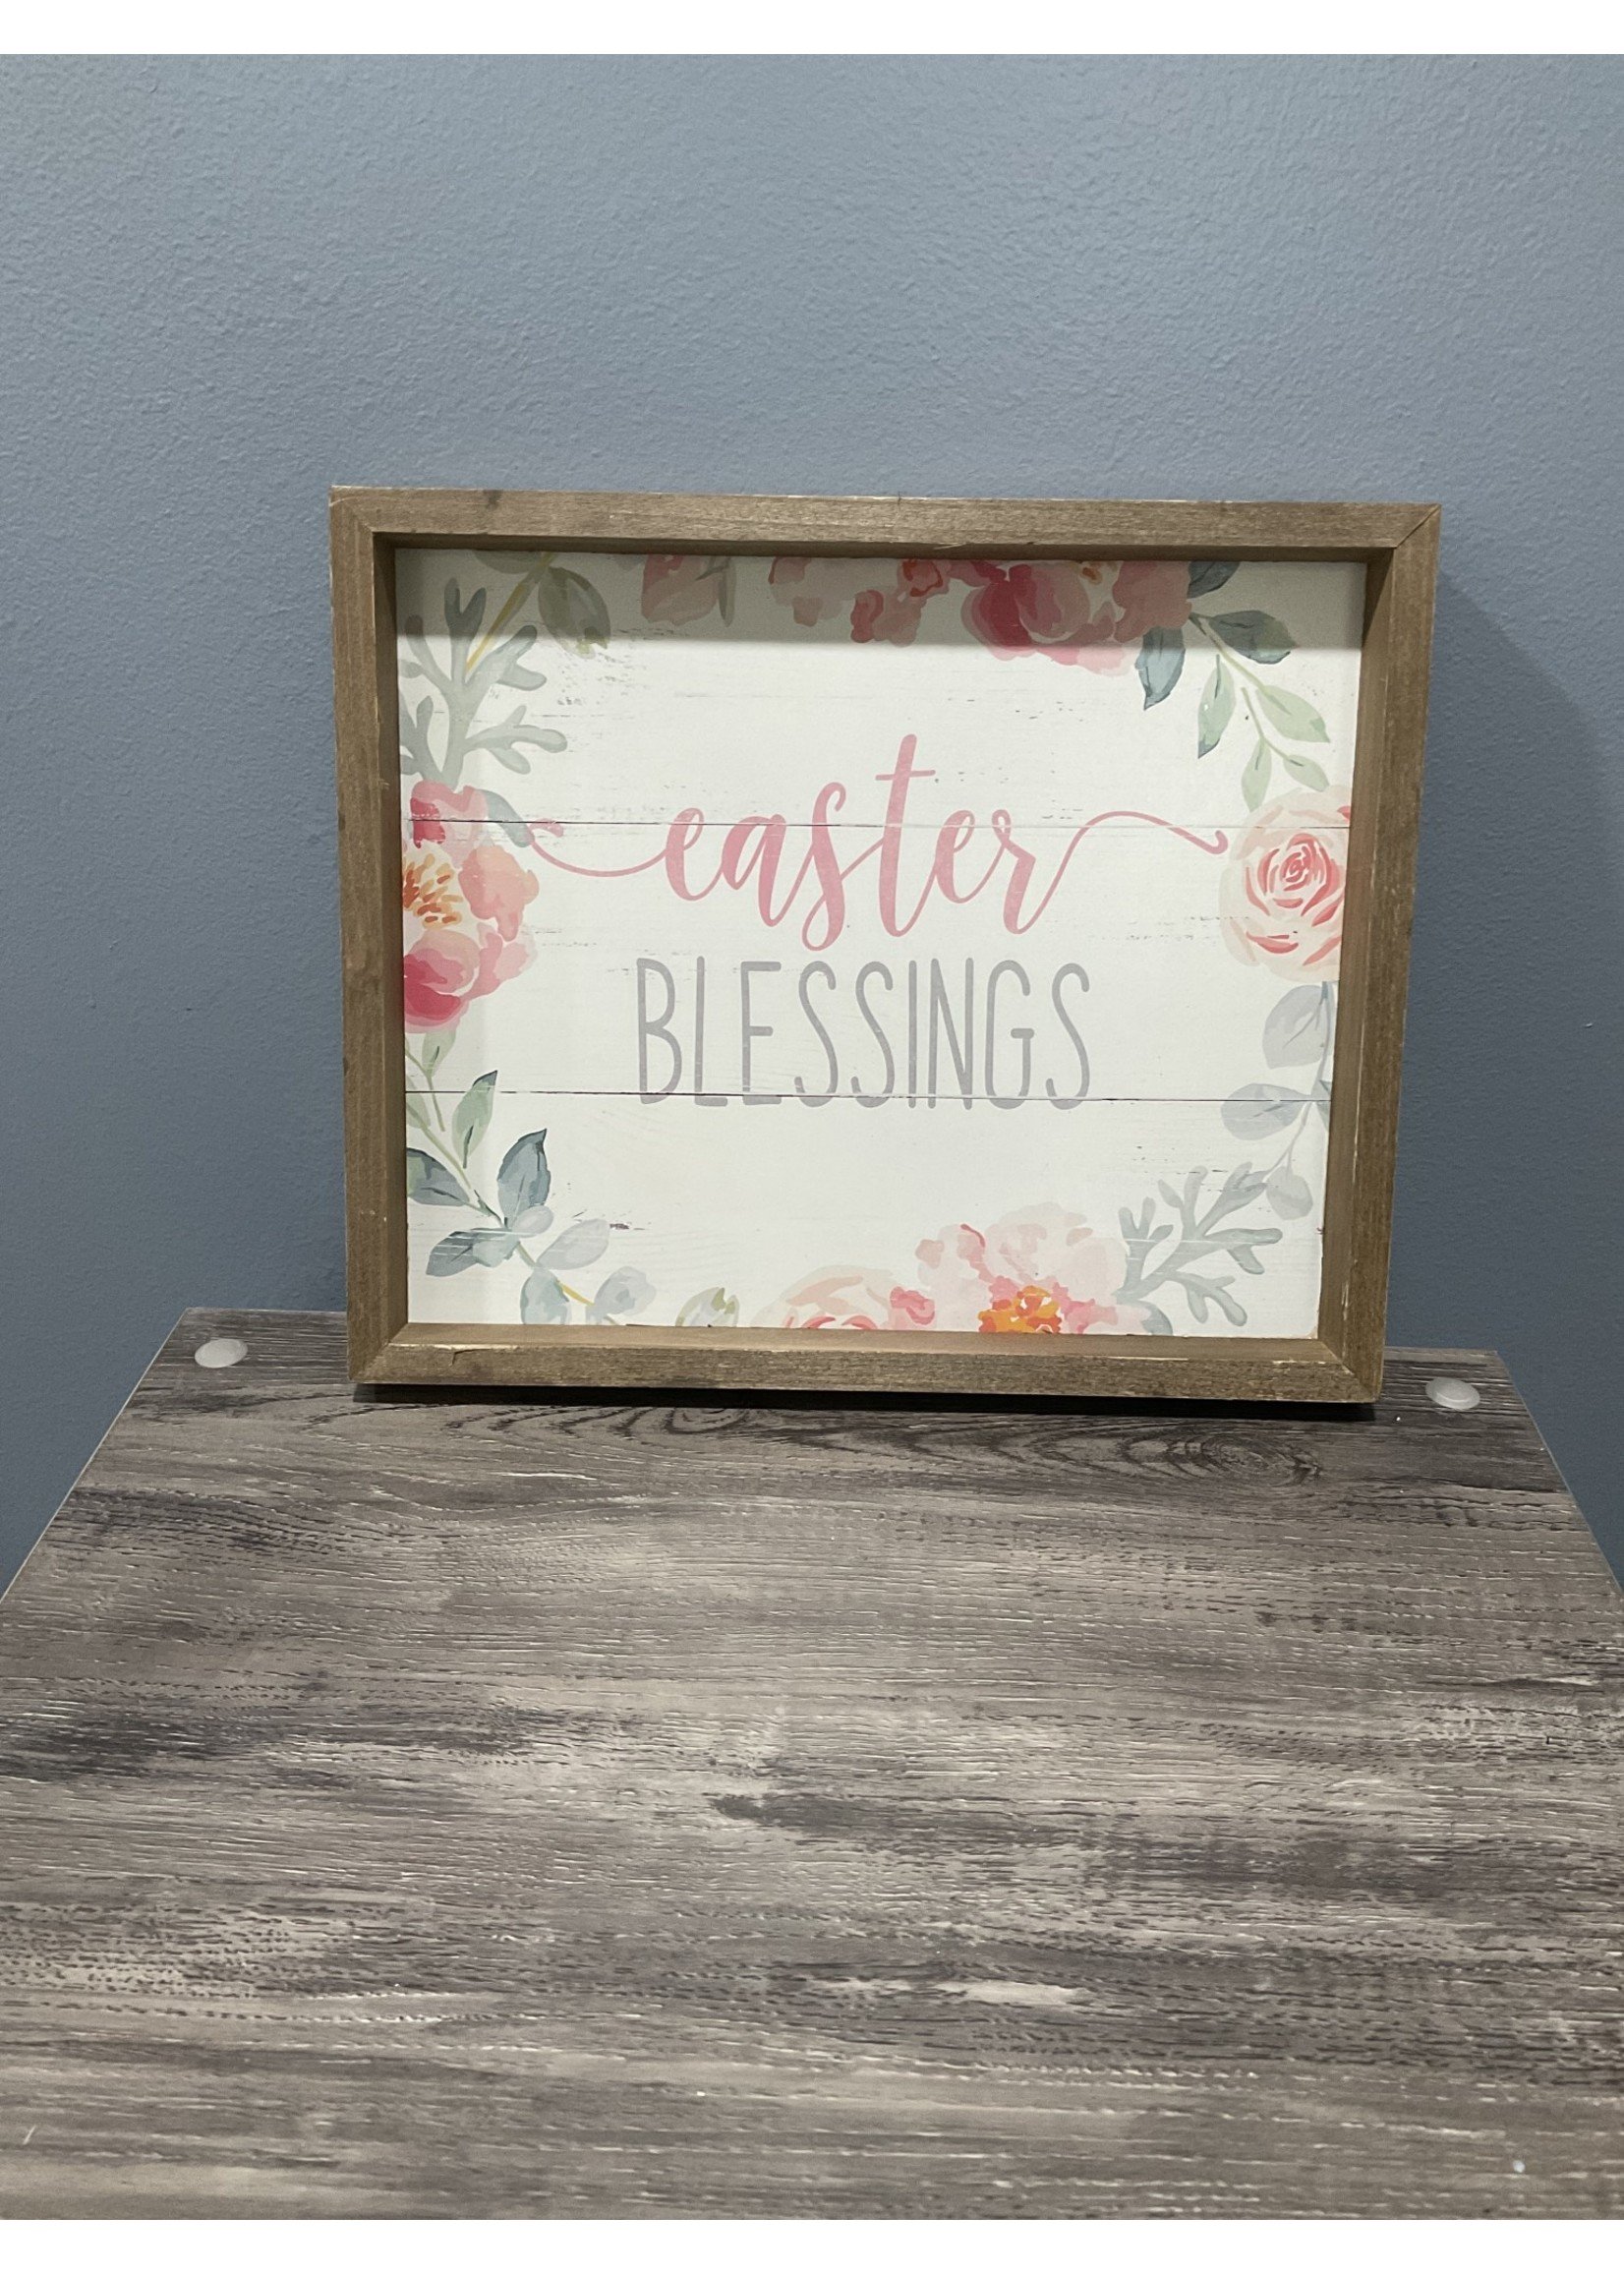 My New Favorite Thing 455 Sign 12x10-"Easter Blessings"